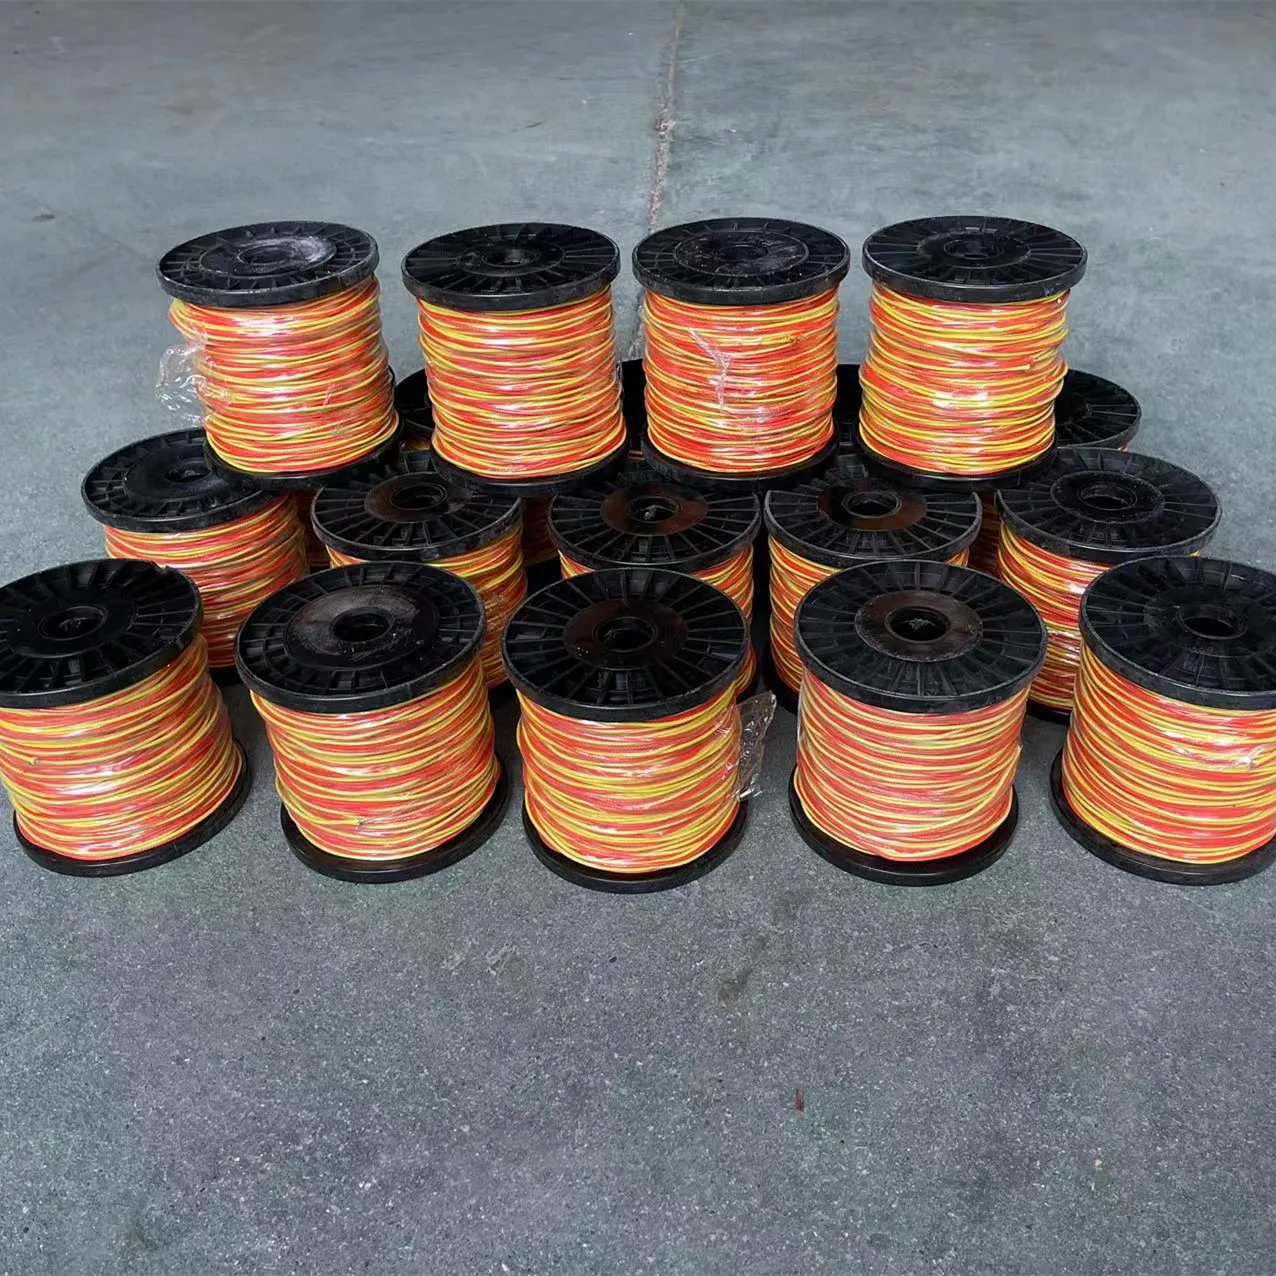 Thermocouple Wire Type K 0.711mmStandard Density Fiber Glass Insulation Red & Yellow 100m Roll for post weld heat treatment